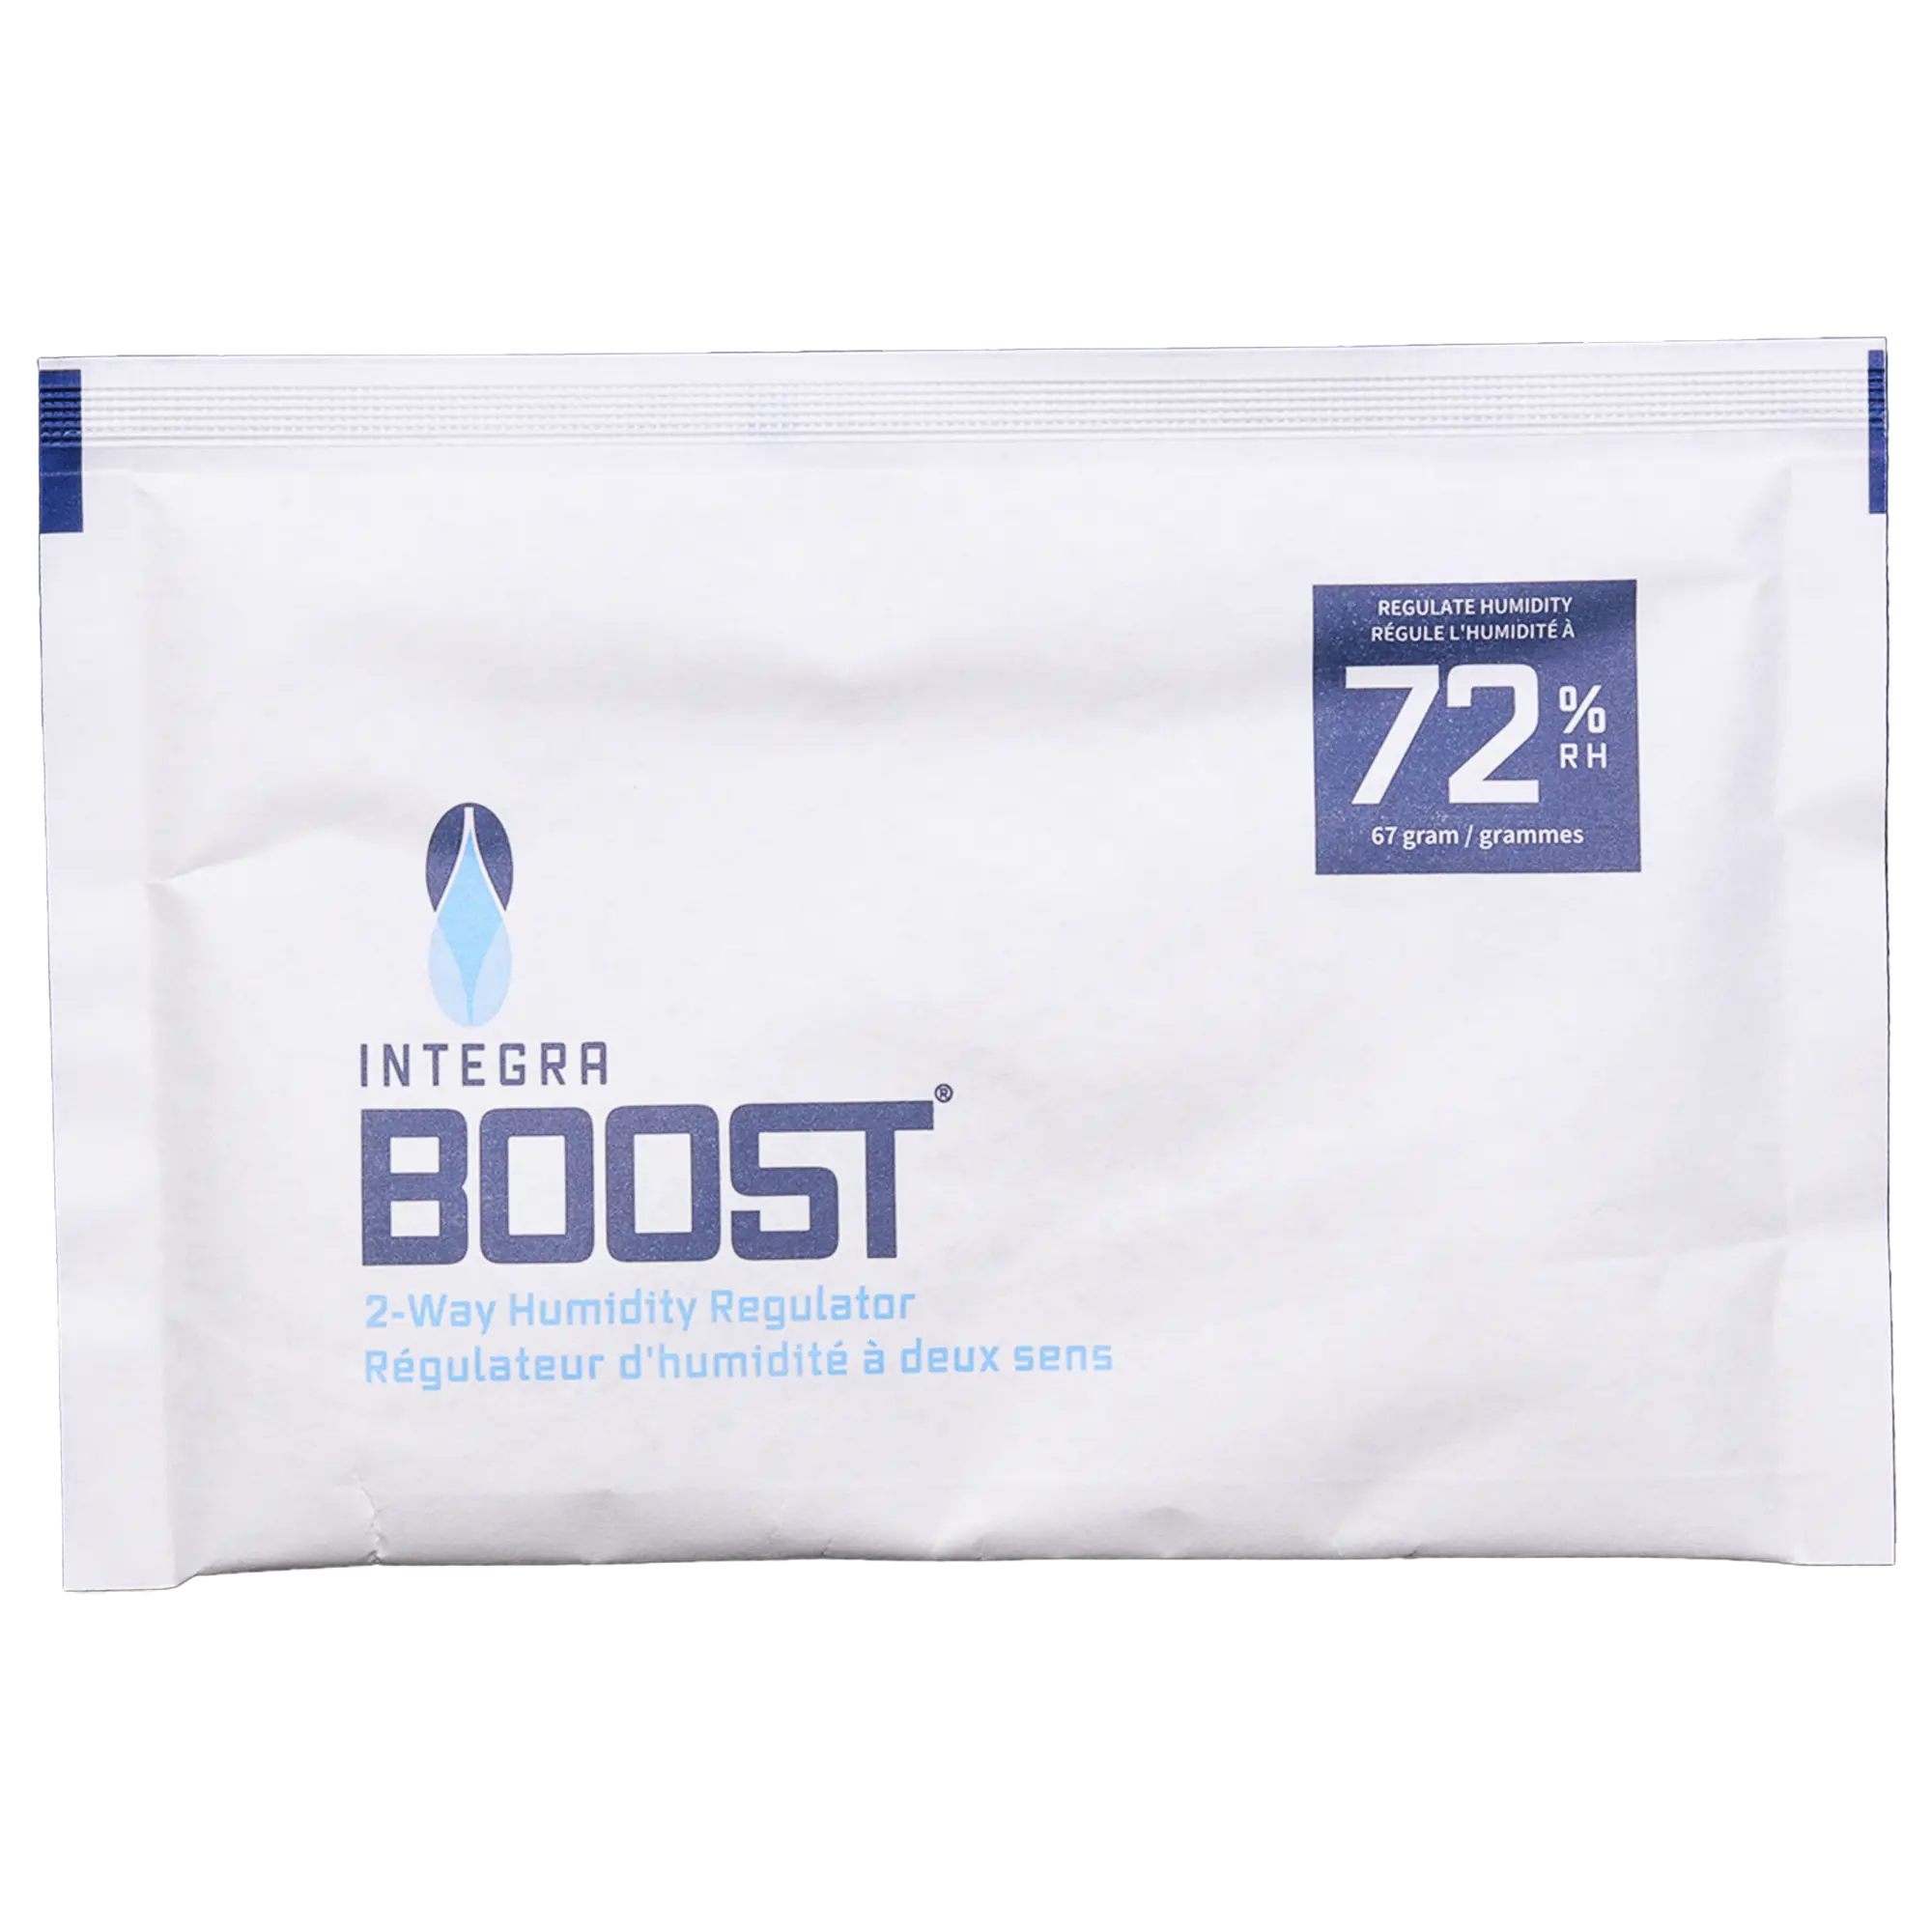 Integra Boost 67g Befeuchterpack 72% R.H.
